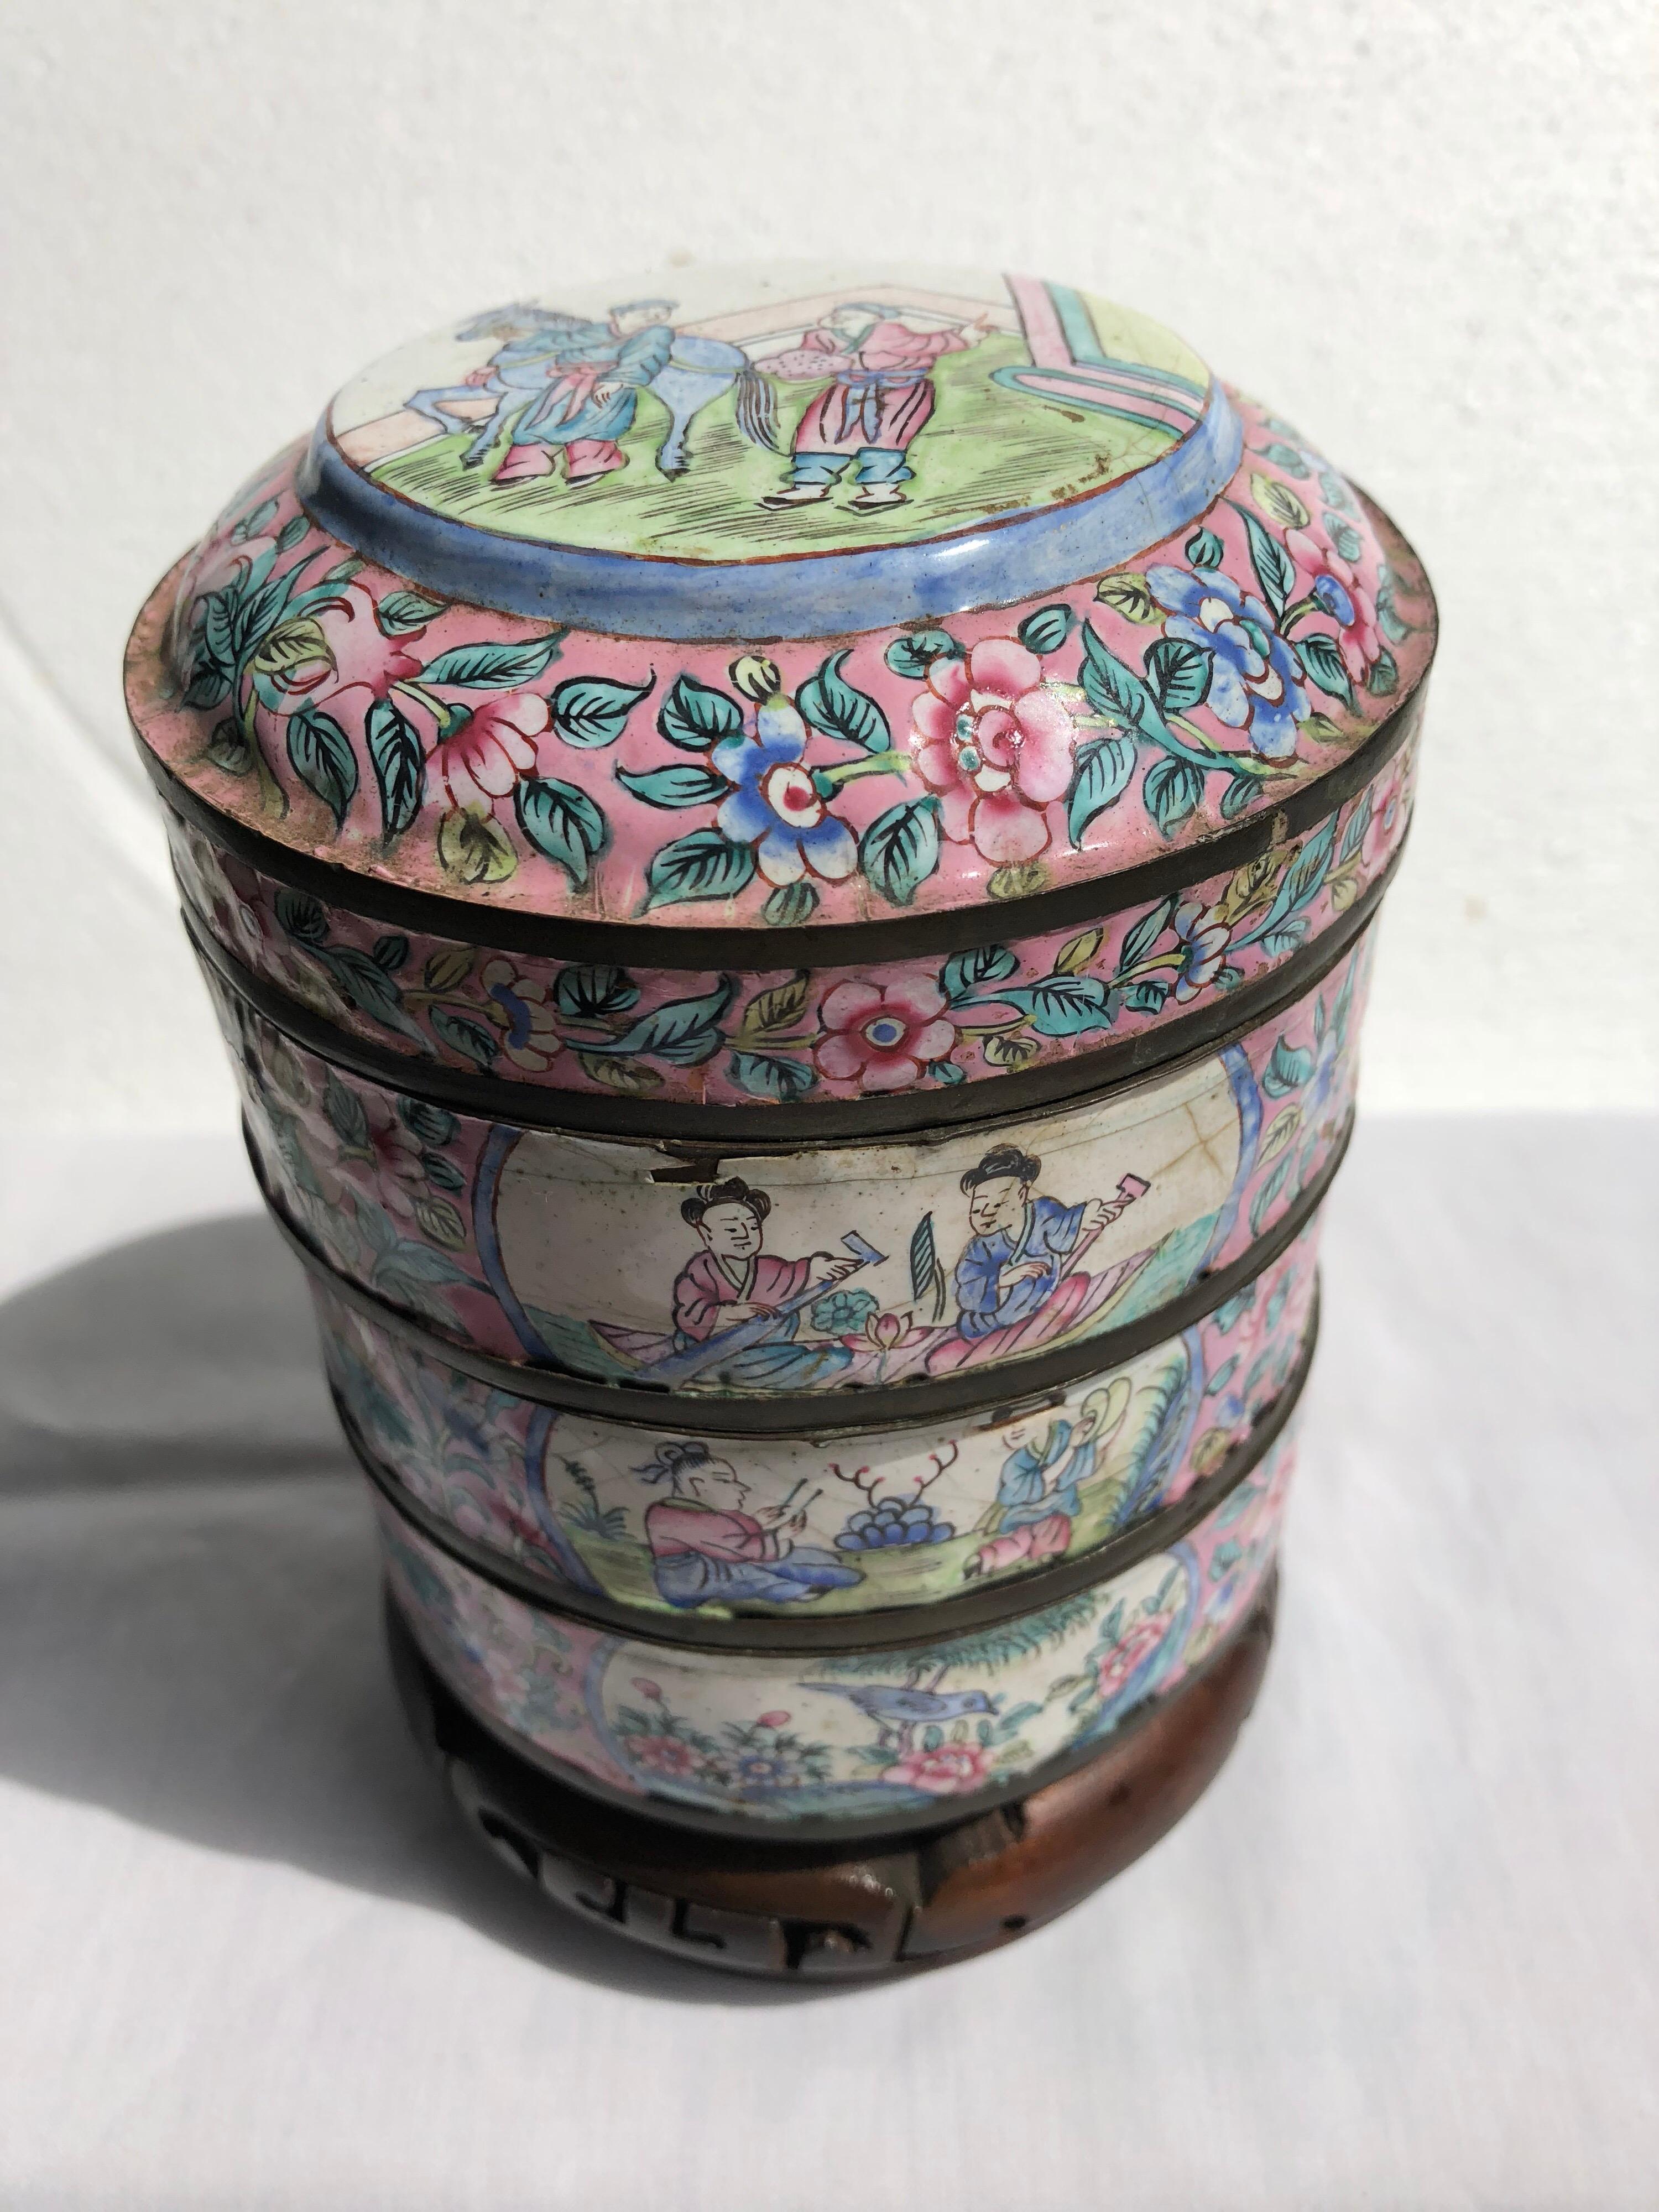 Canton enamel three part round jar on carved stand. Top piece shows two gentlemen with a horse.
One side shows men in a row boat, one playing musical instruments and the third a bird in a
garden. The other side has a fishing scene, tea drinking